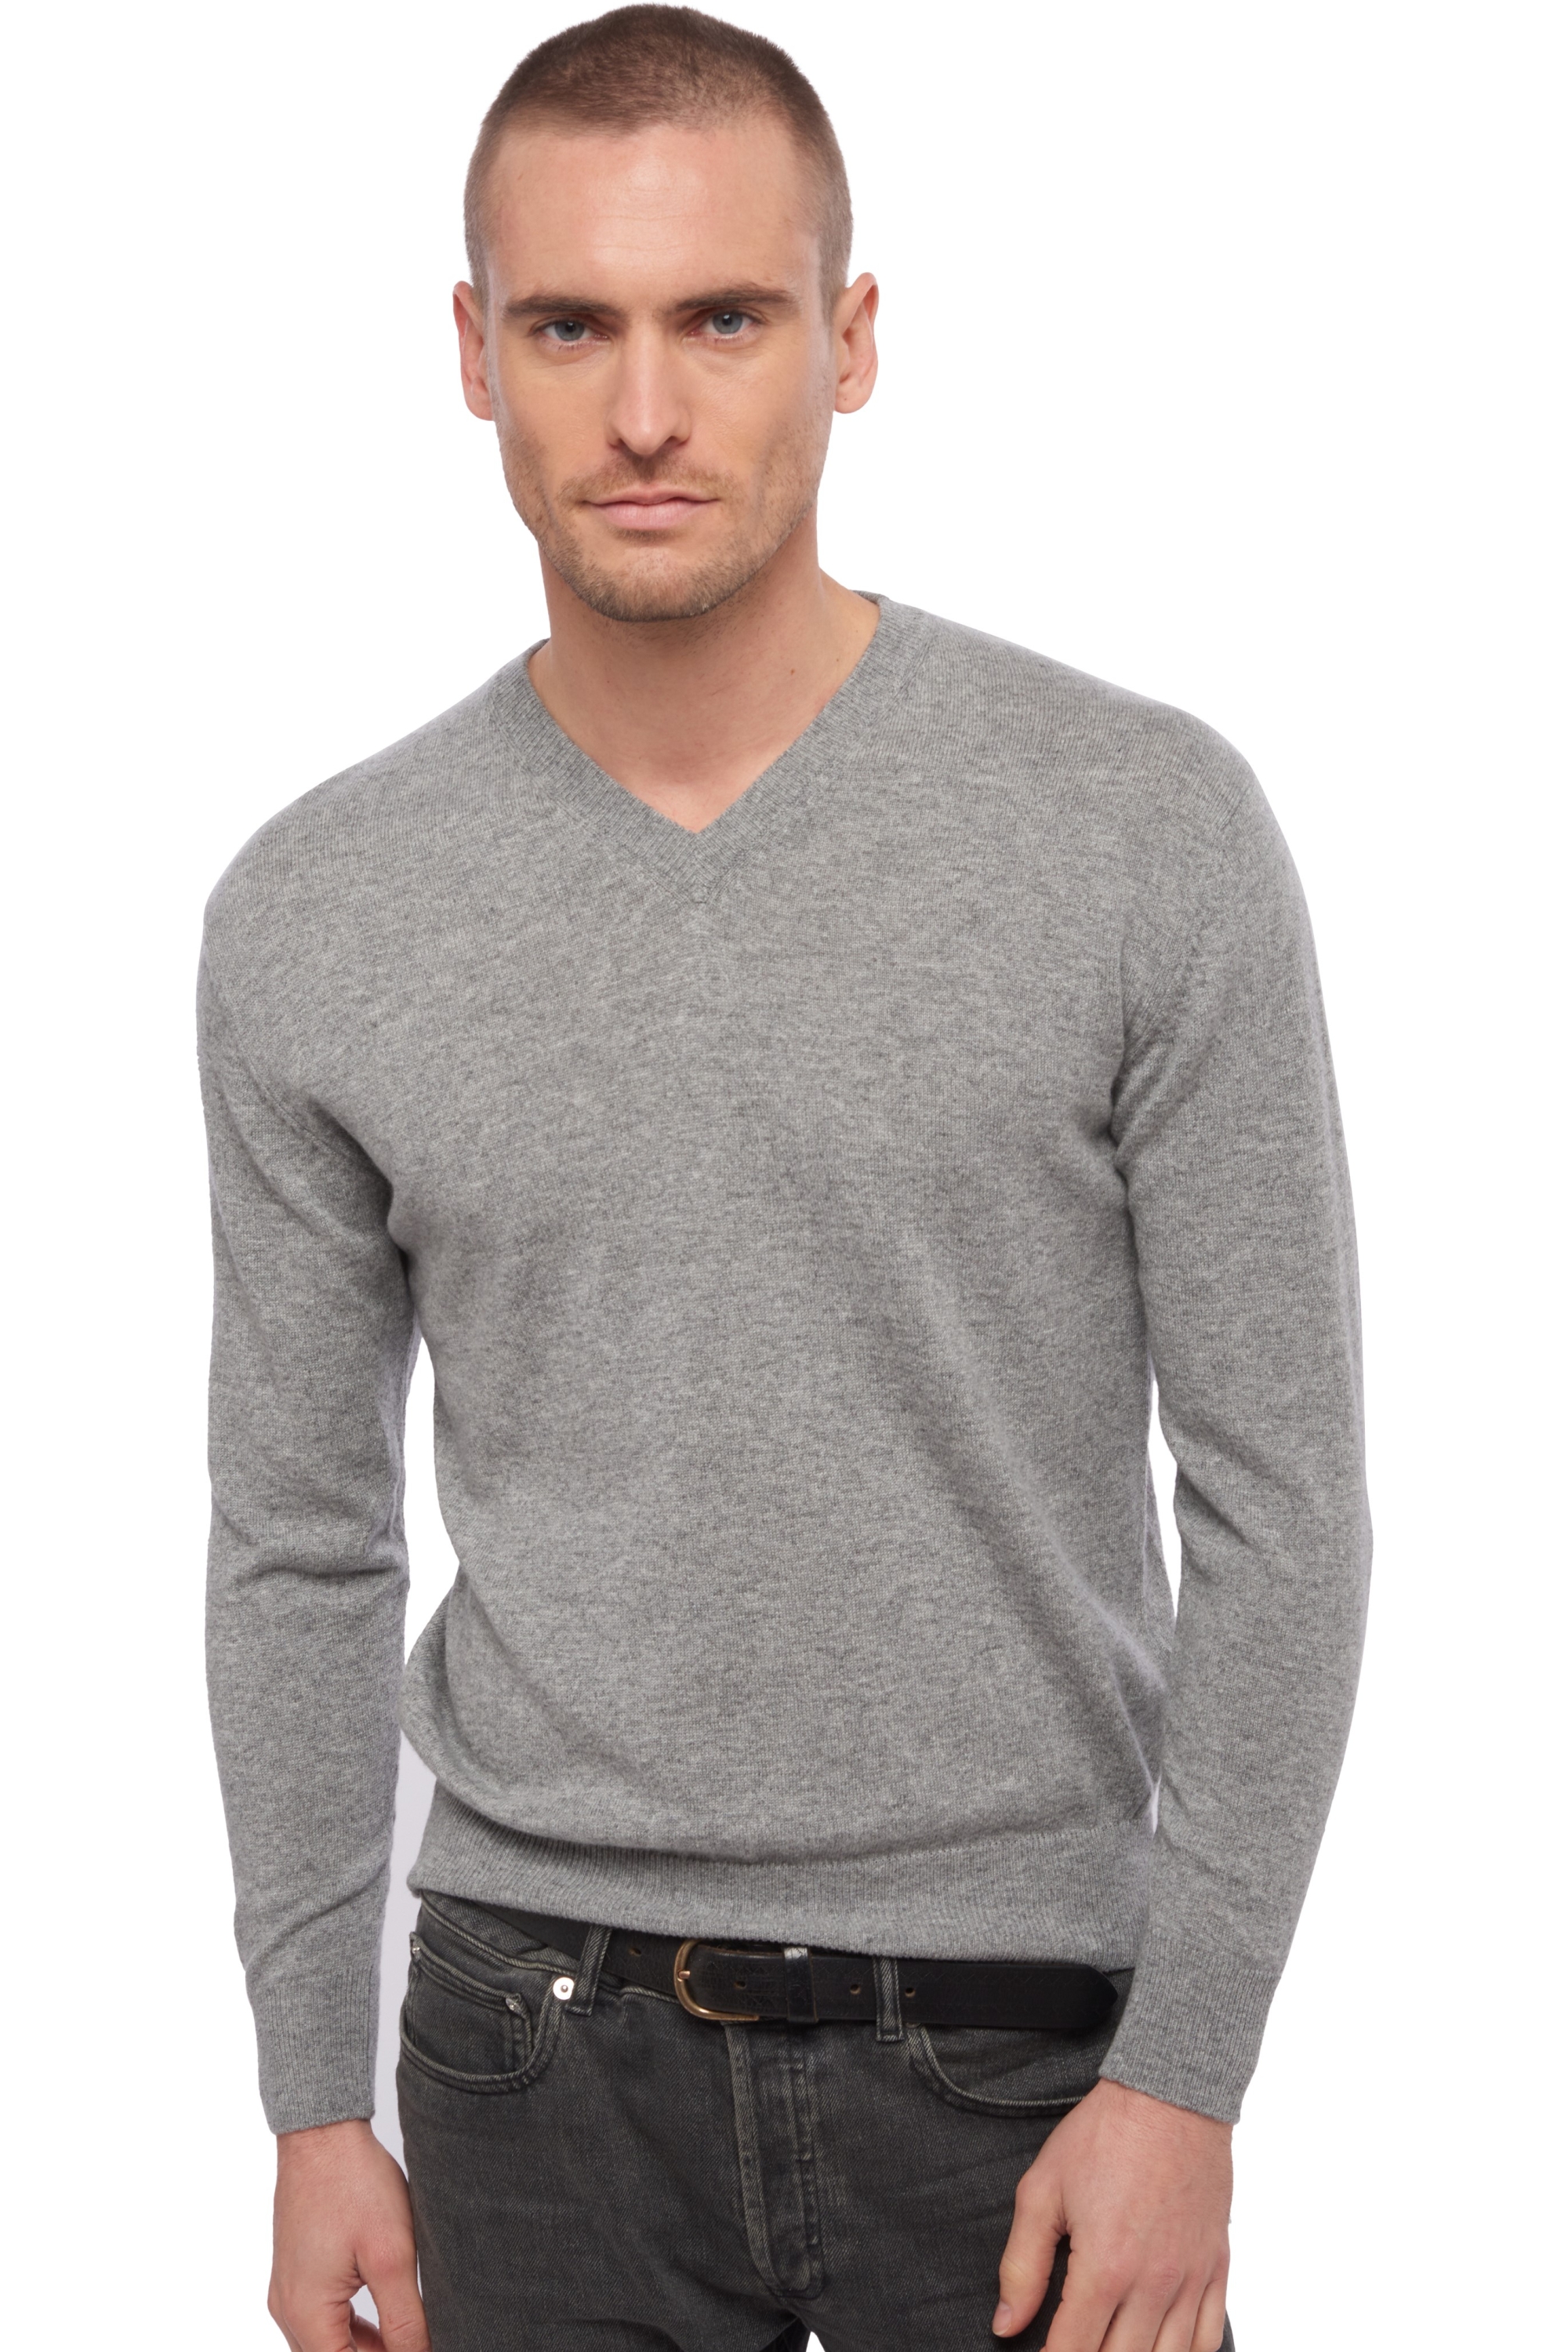 Cachemire pull homme col v hippolyte gris chine 2xl